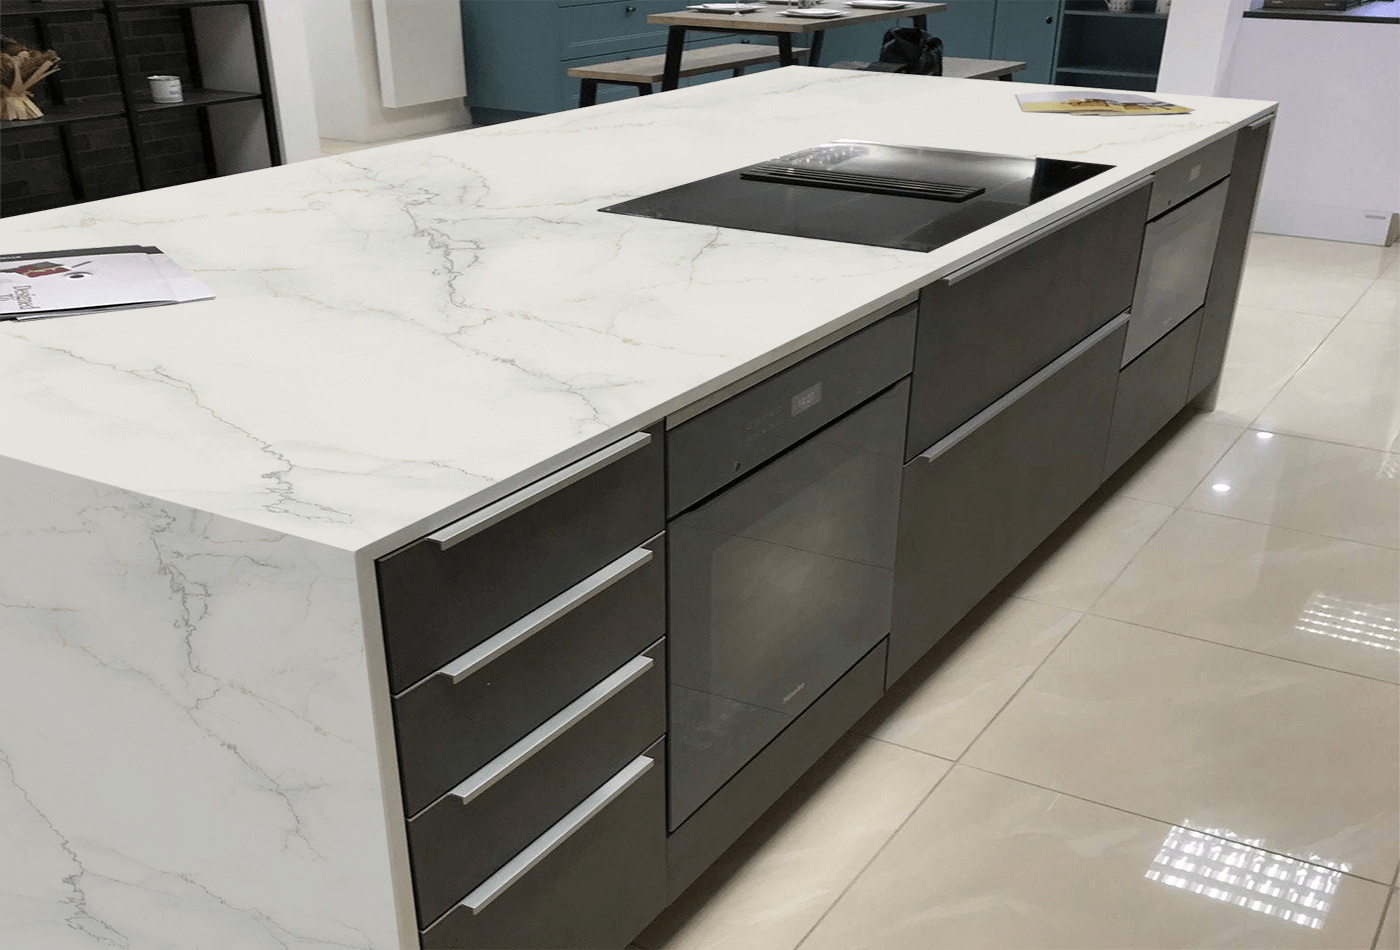 Bring Out the Benefits of Porcelain Worktops